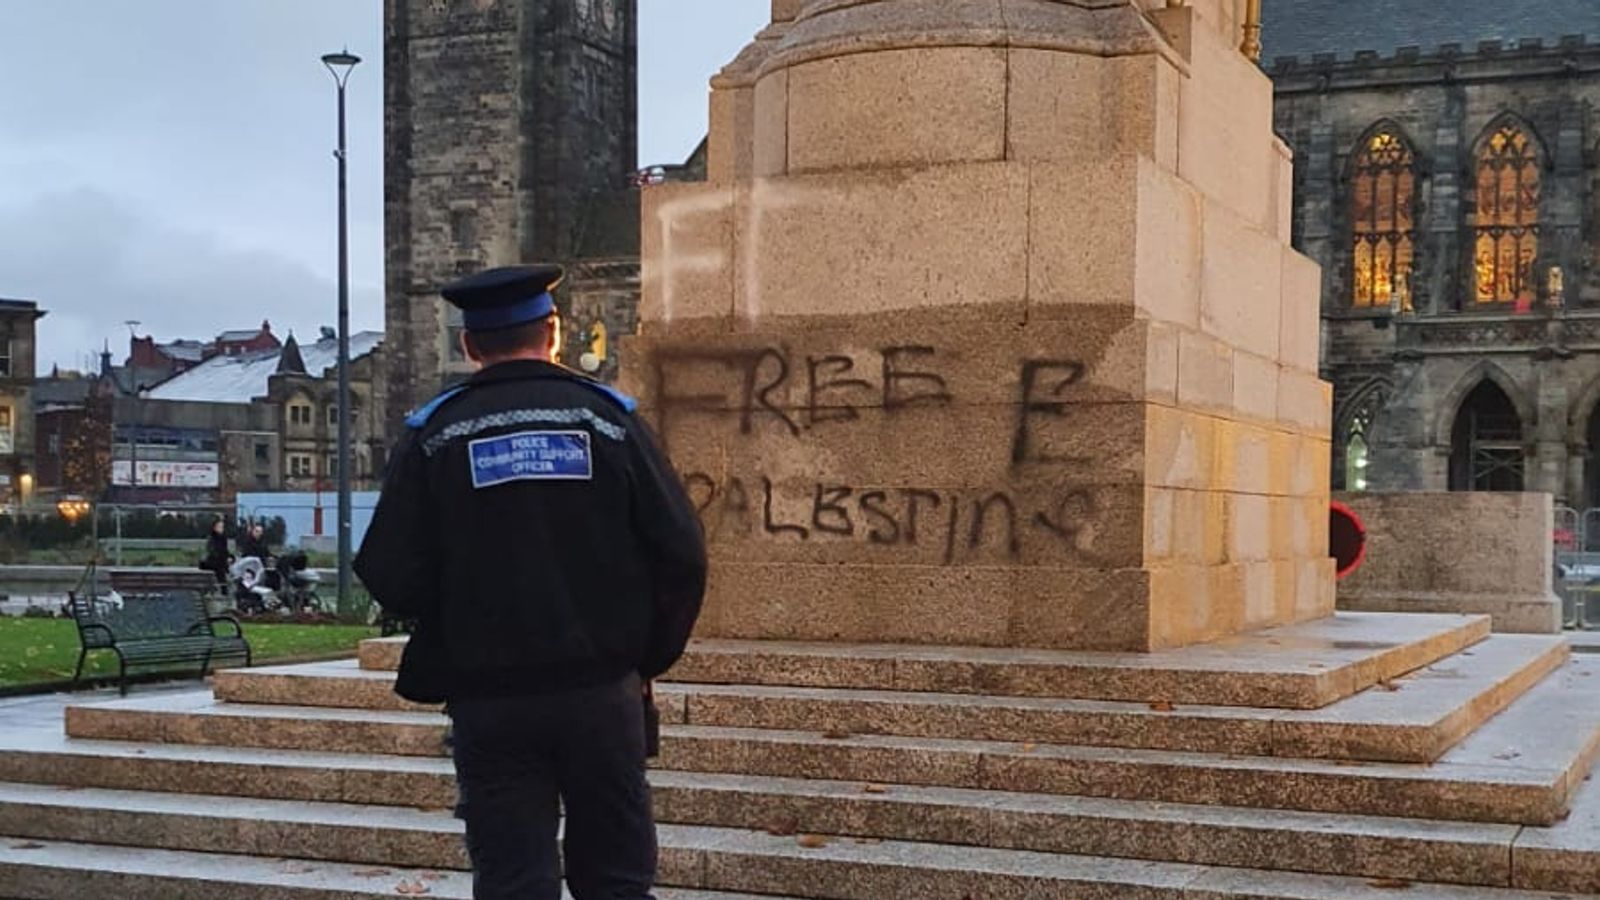 Israel-Hamas war: Rochdale Cenotaph under police protection after being daubed with 'Free Palestine' ahead of Armistice Day